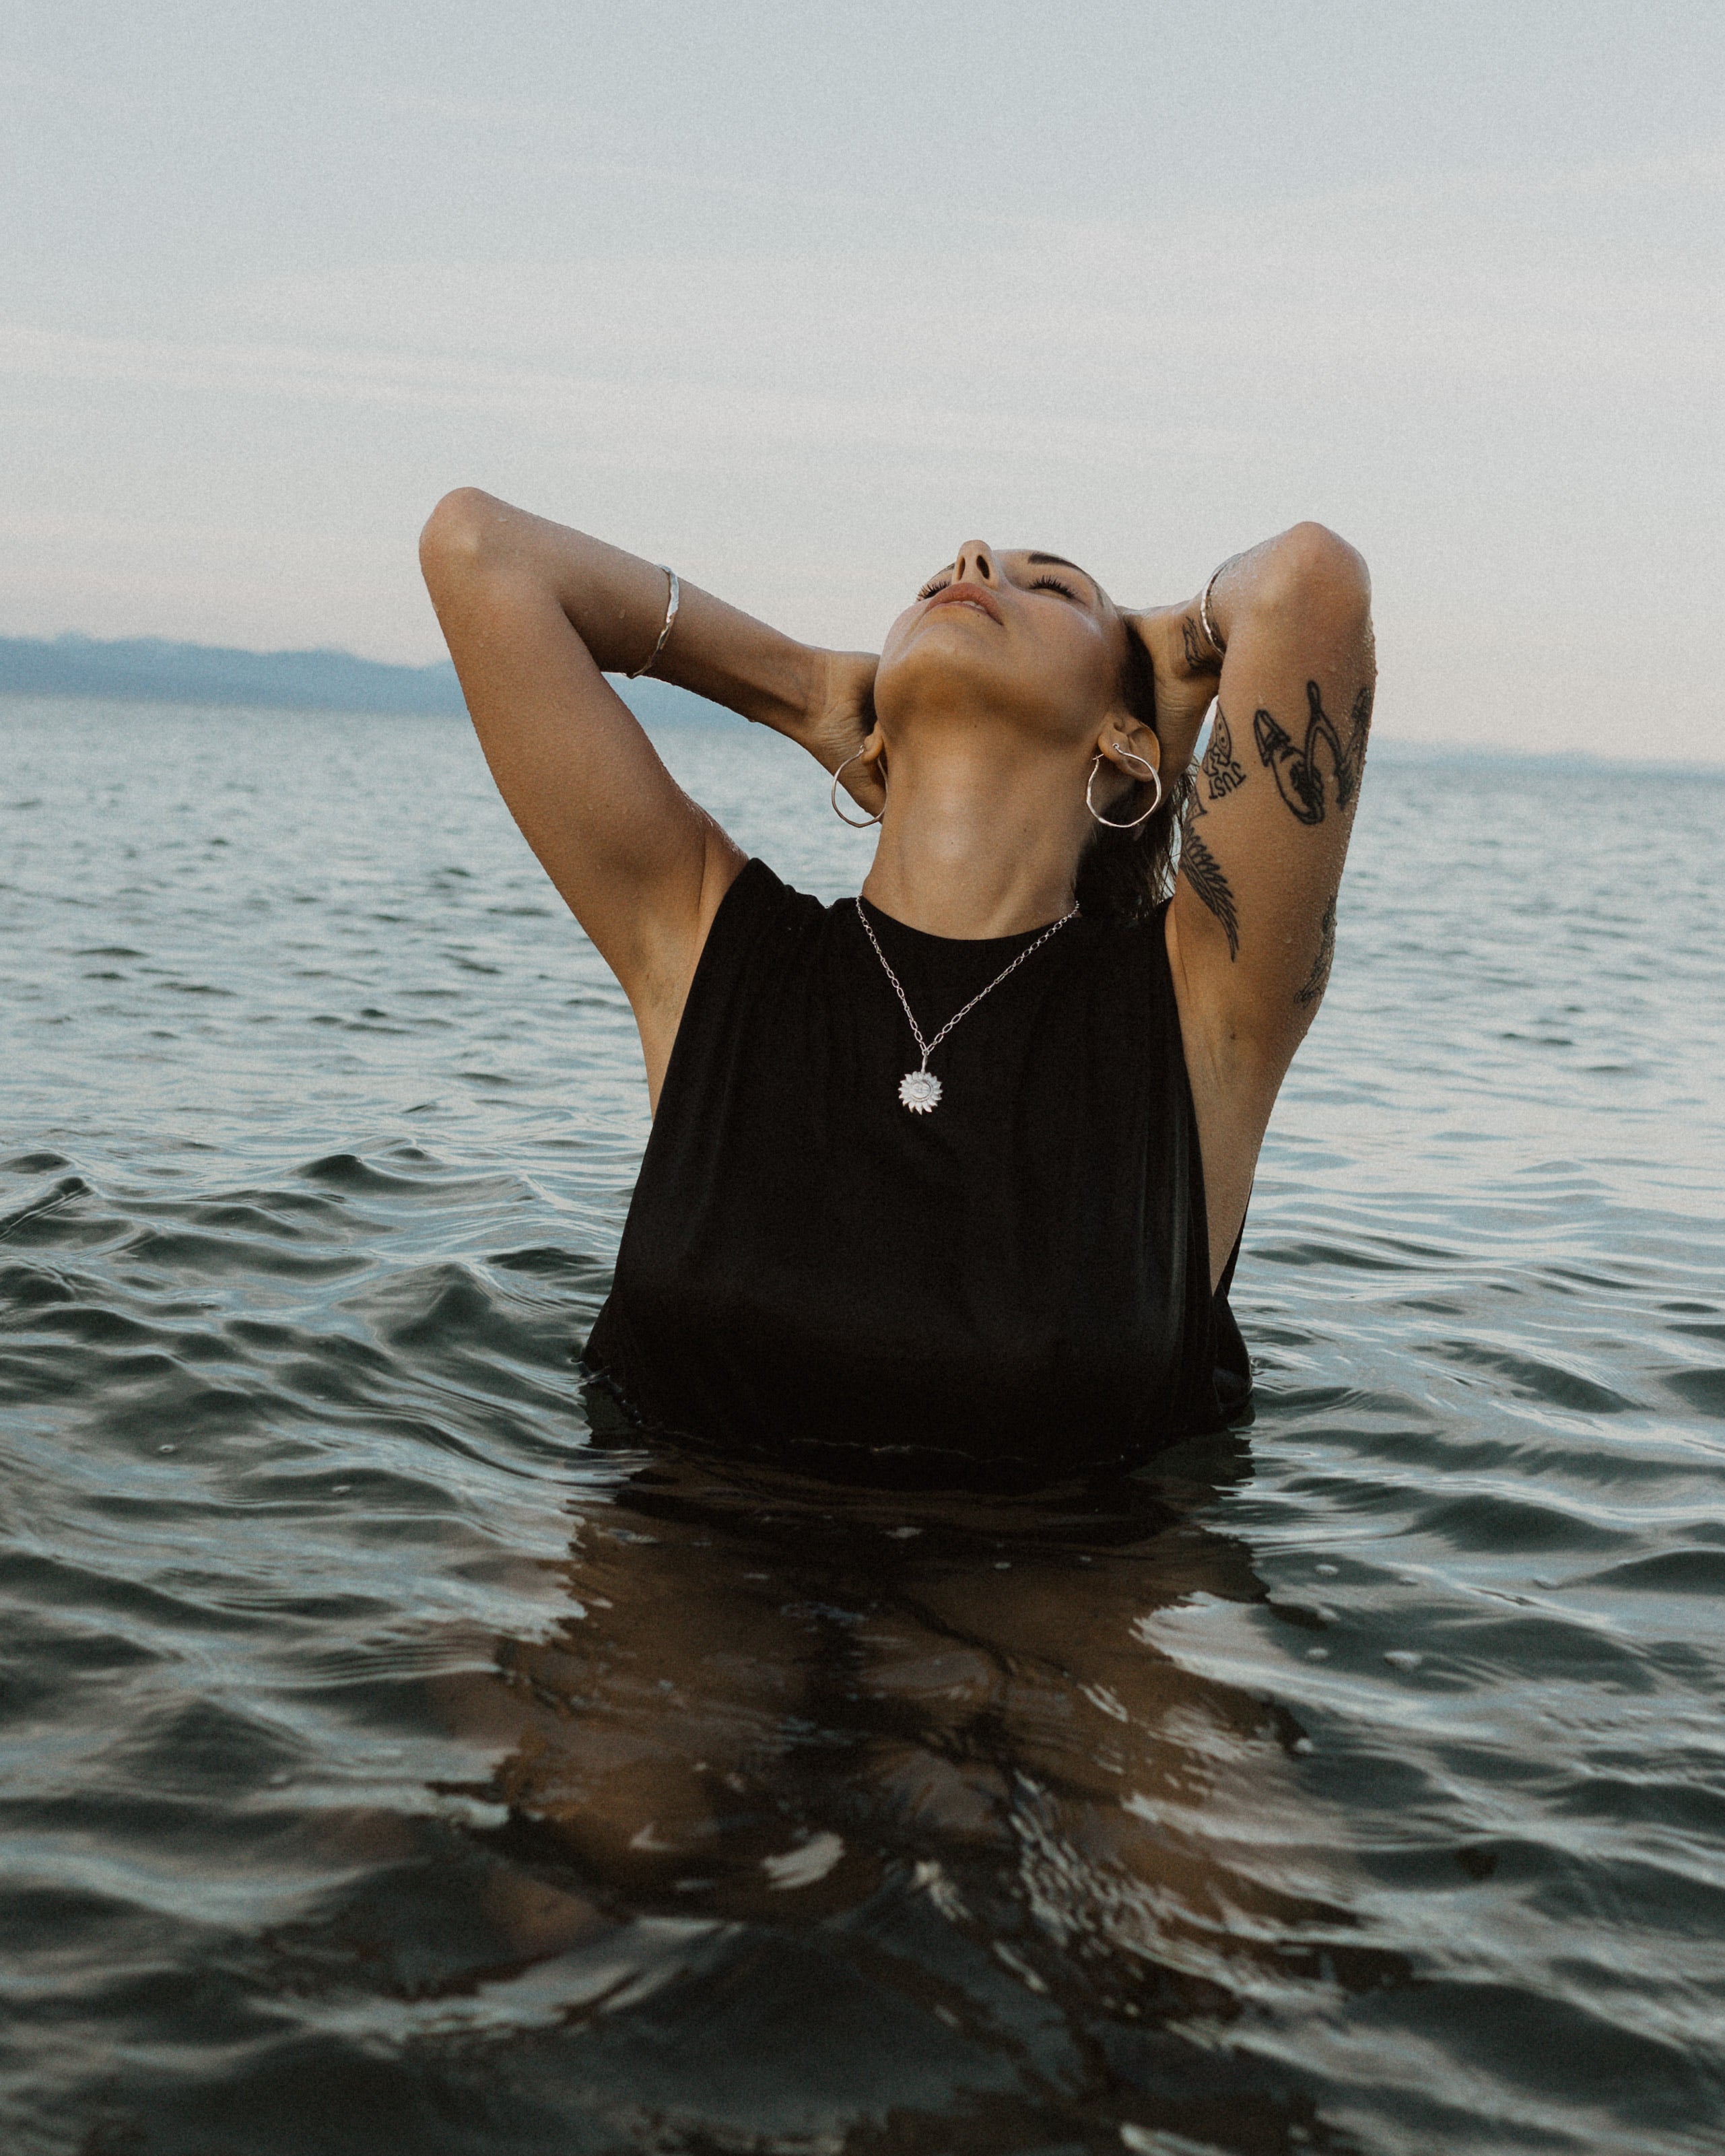 a woman kneeling in the water at the beach, wearing a black tank top and silver jewelry. Her jewelry includes a silver sun pendant necklace, silver hoop earrings and silver bangle bracelets